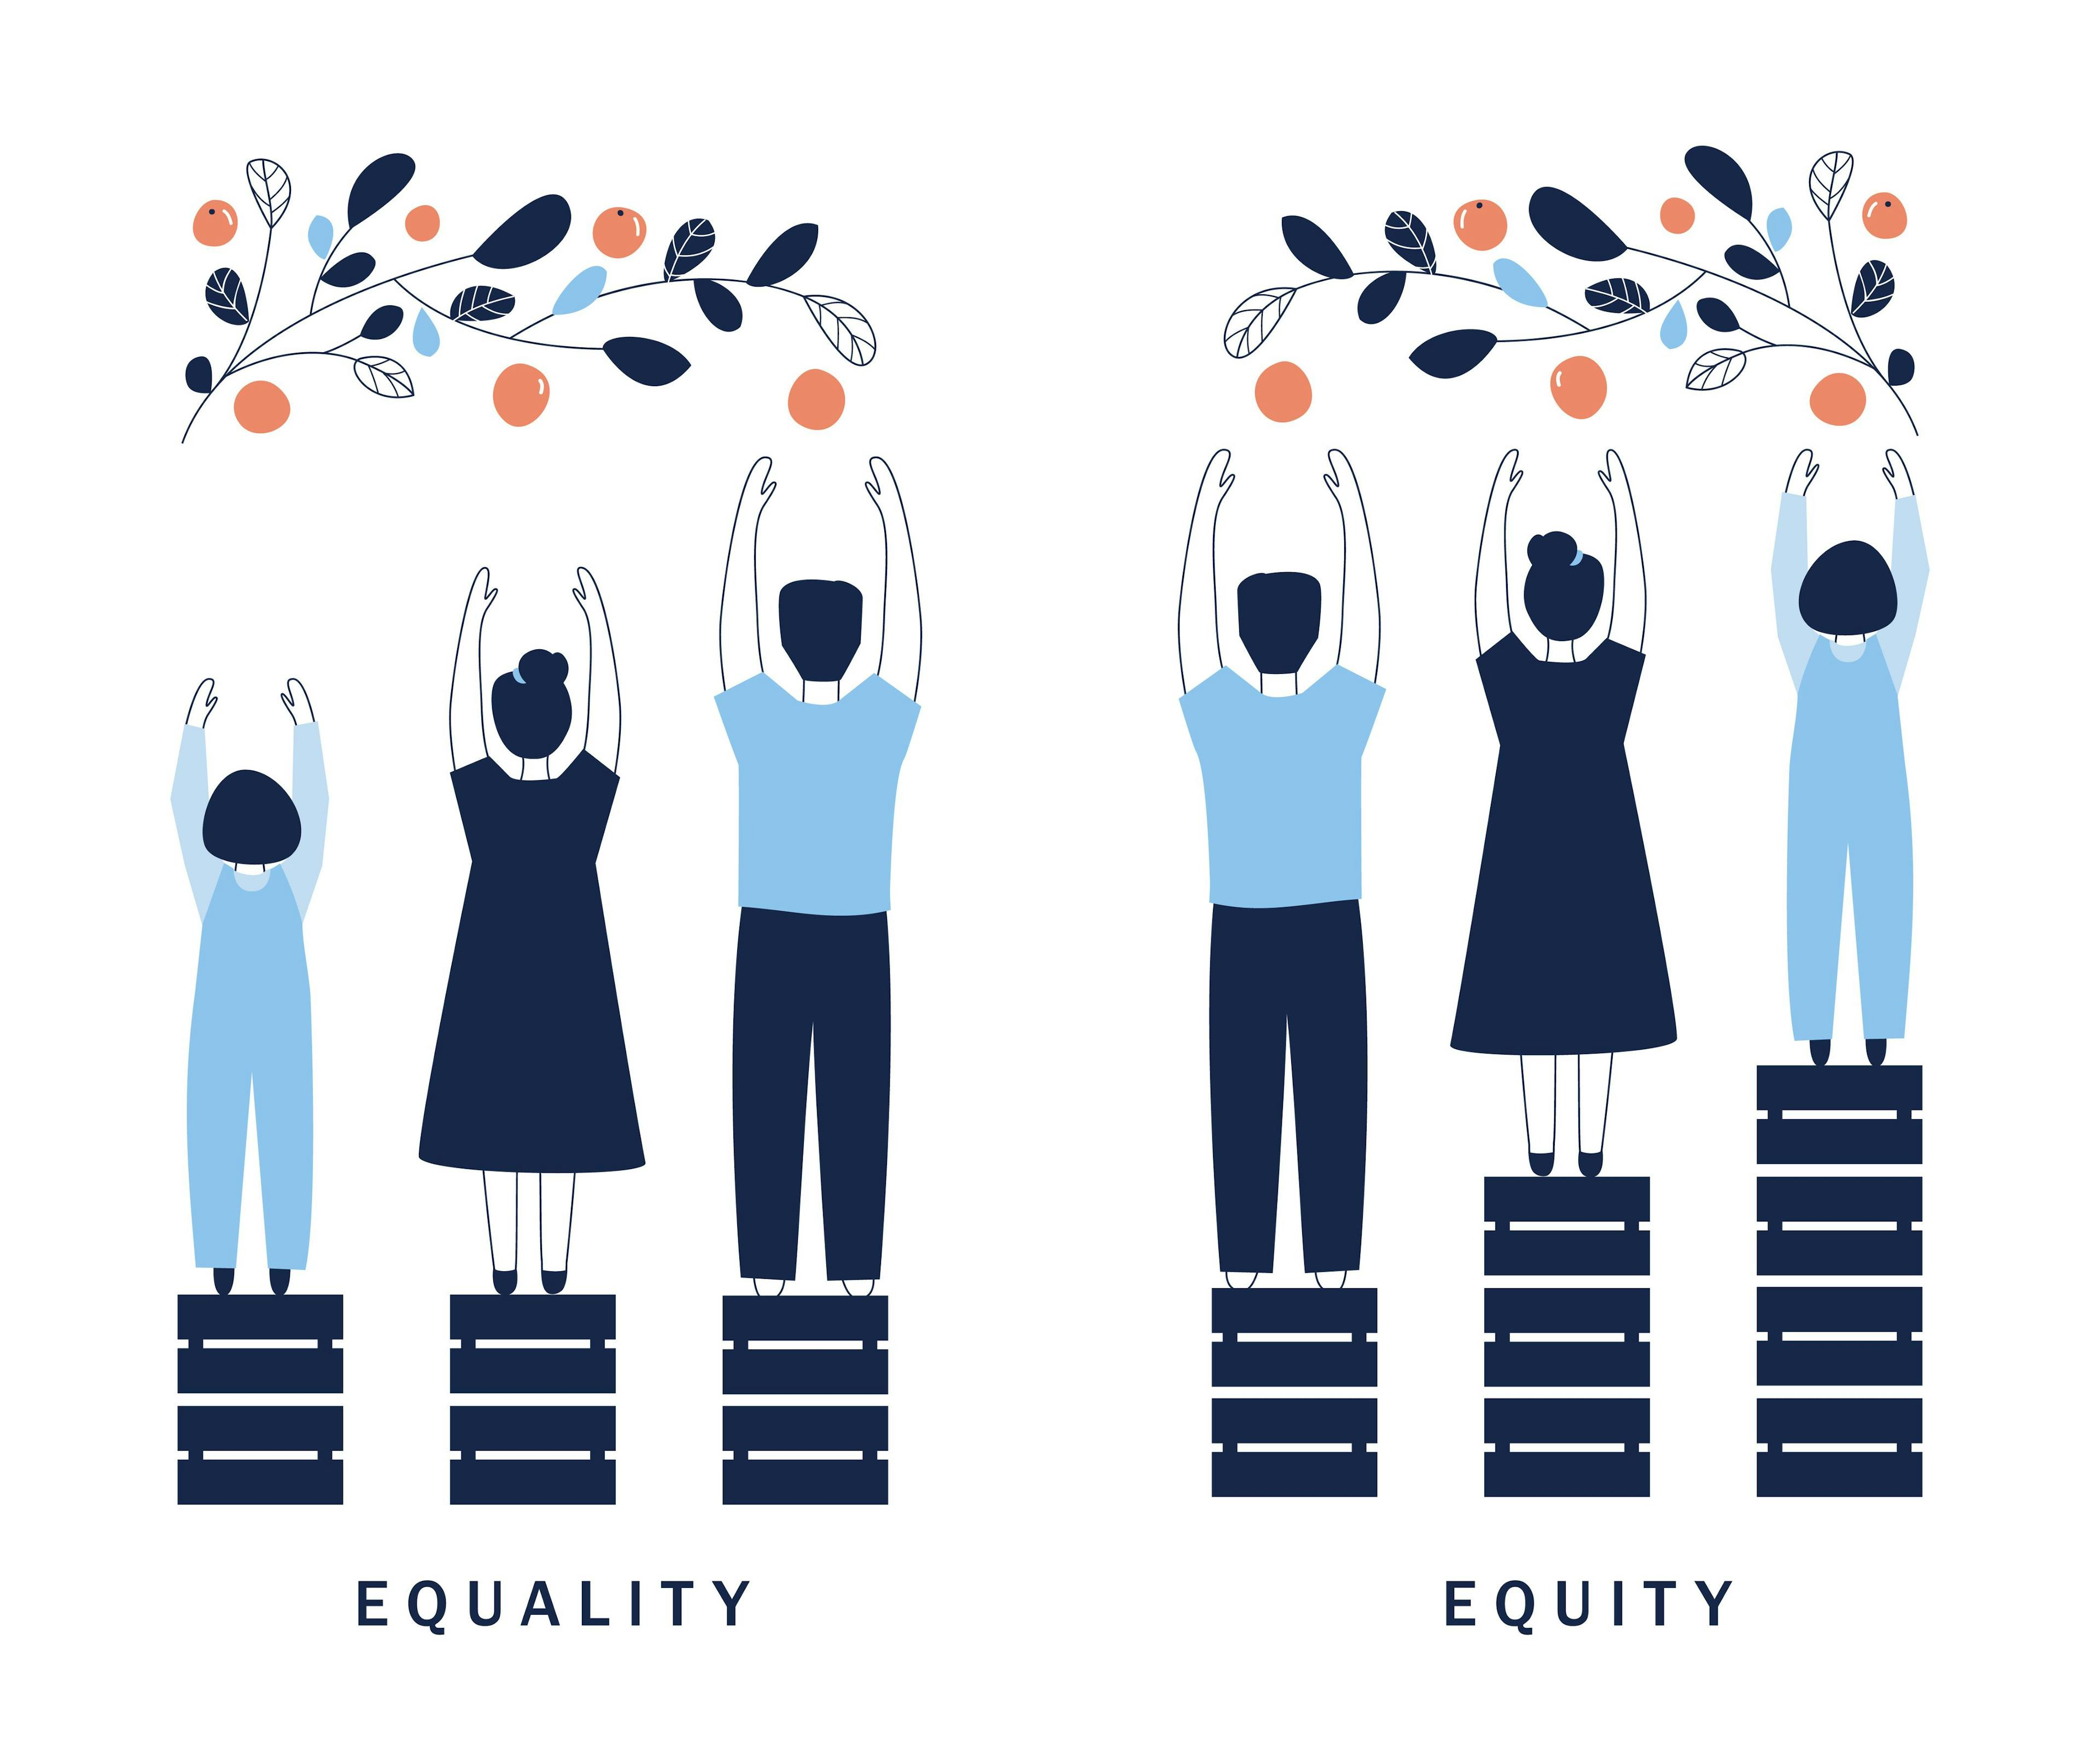 Equality and Equity Concept Illustration. Human Rights, Equal Opportunities and Respective Needs. Modern Design Vector Illustration | Image credit: juliabatsheva – stock.adobe.com